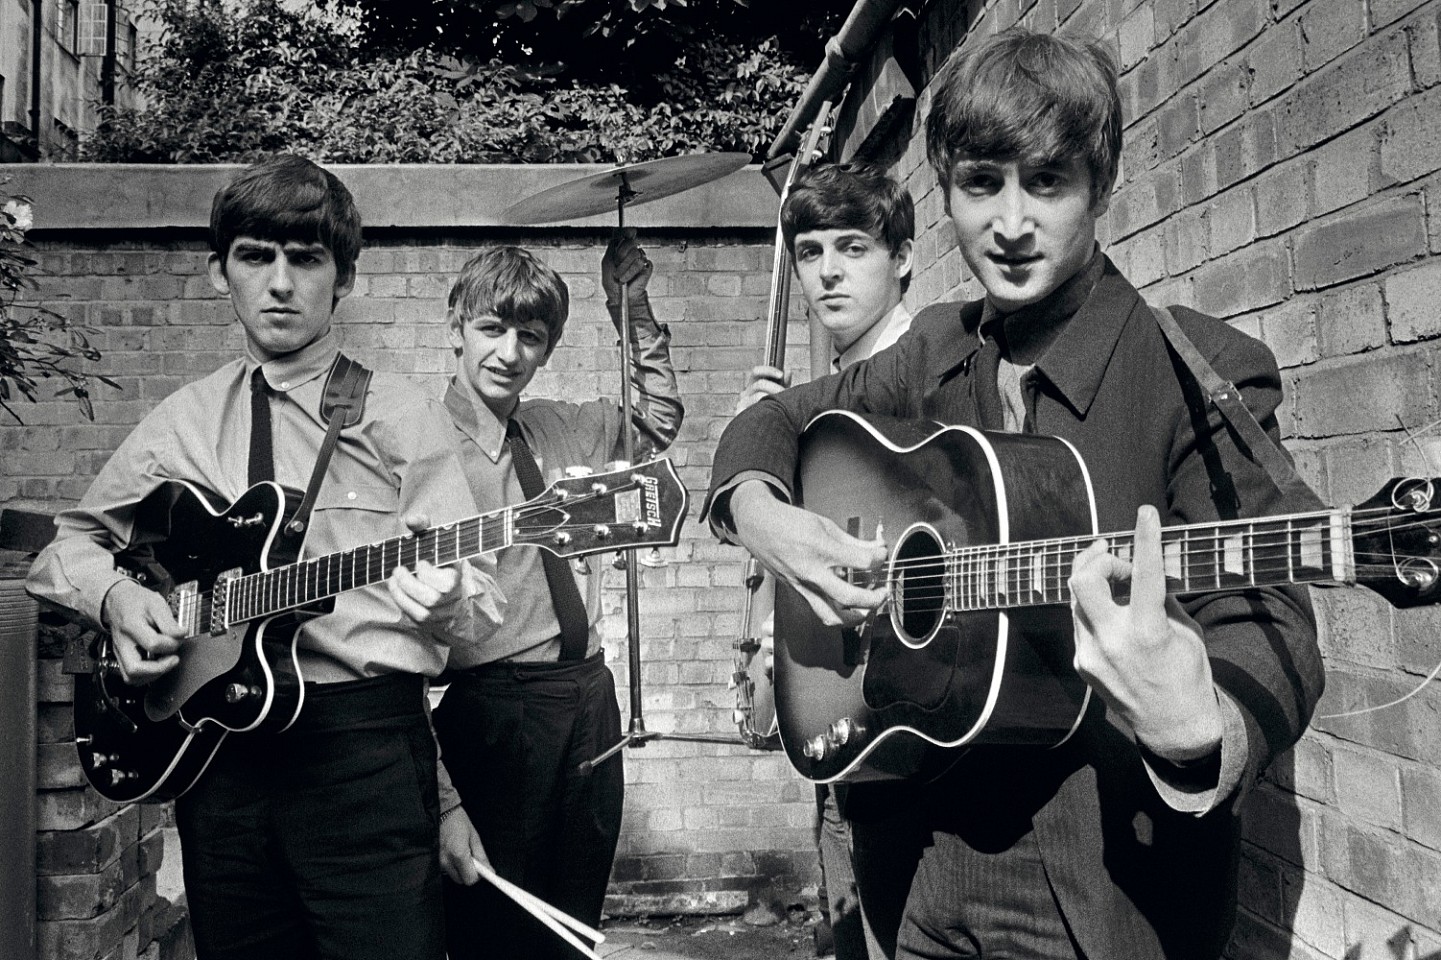 Terry O&#039;Neill, The Beatles, Abbey Road Studios, Ed. of 50, 1963
gelatin silver print, 20 x 30 in.